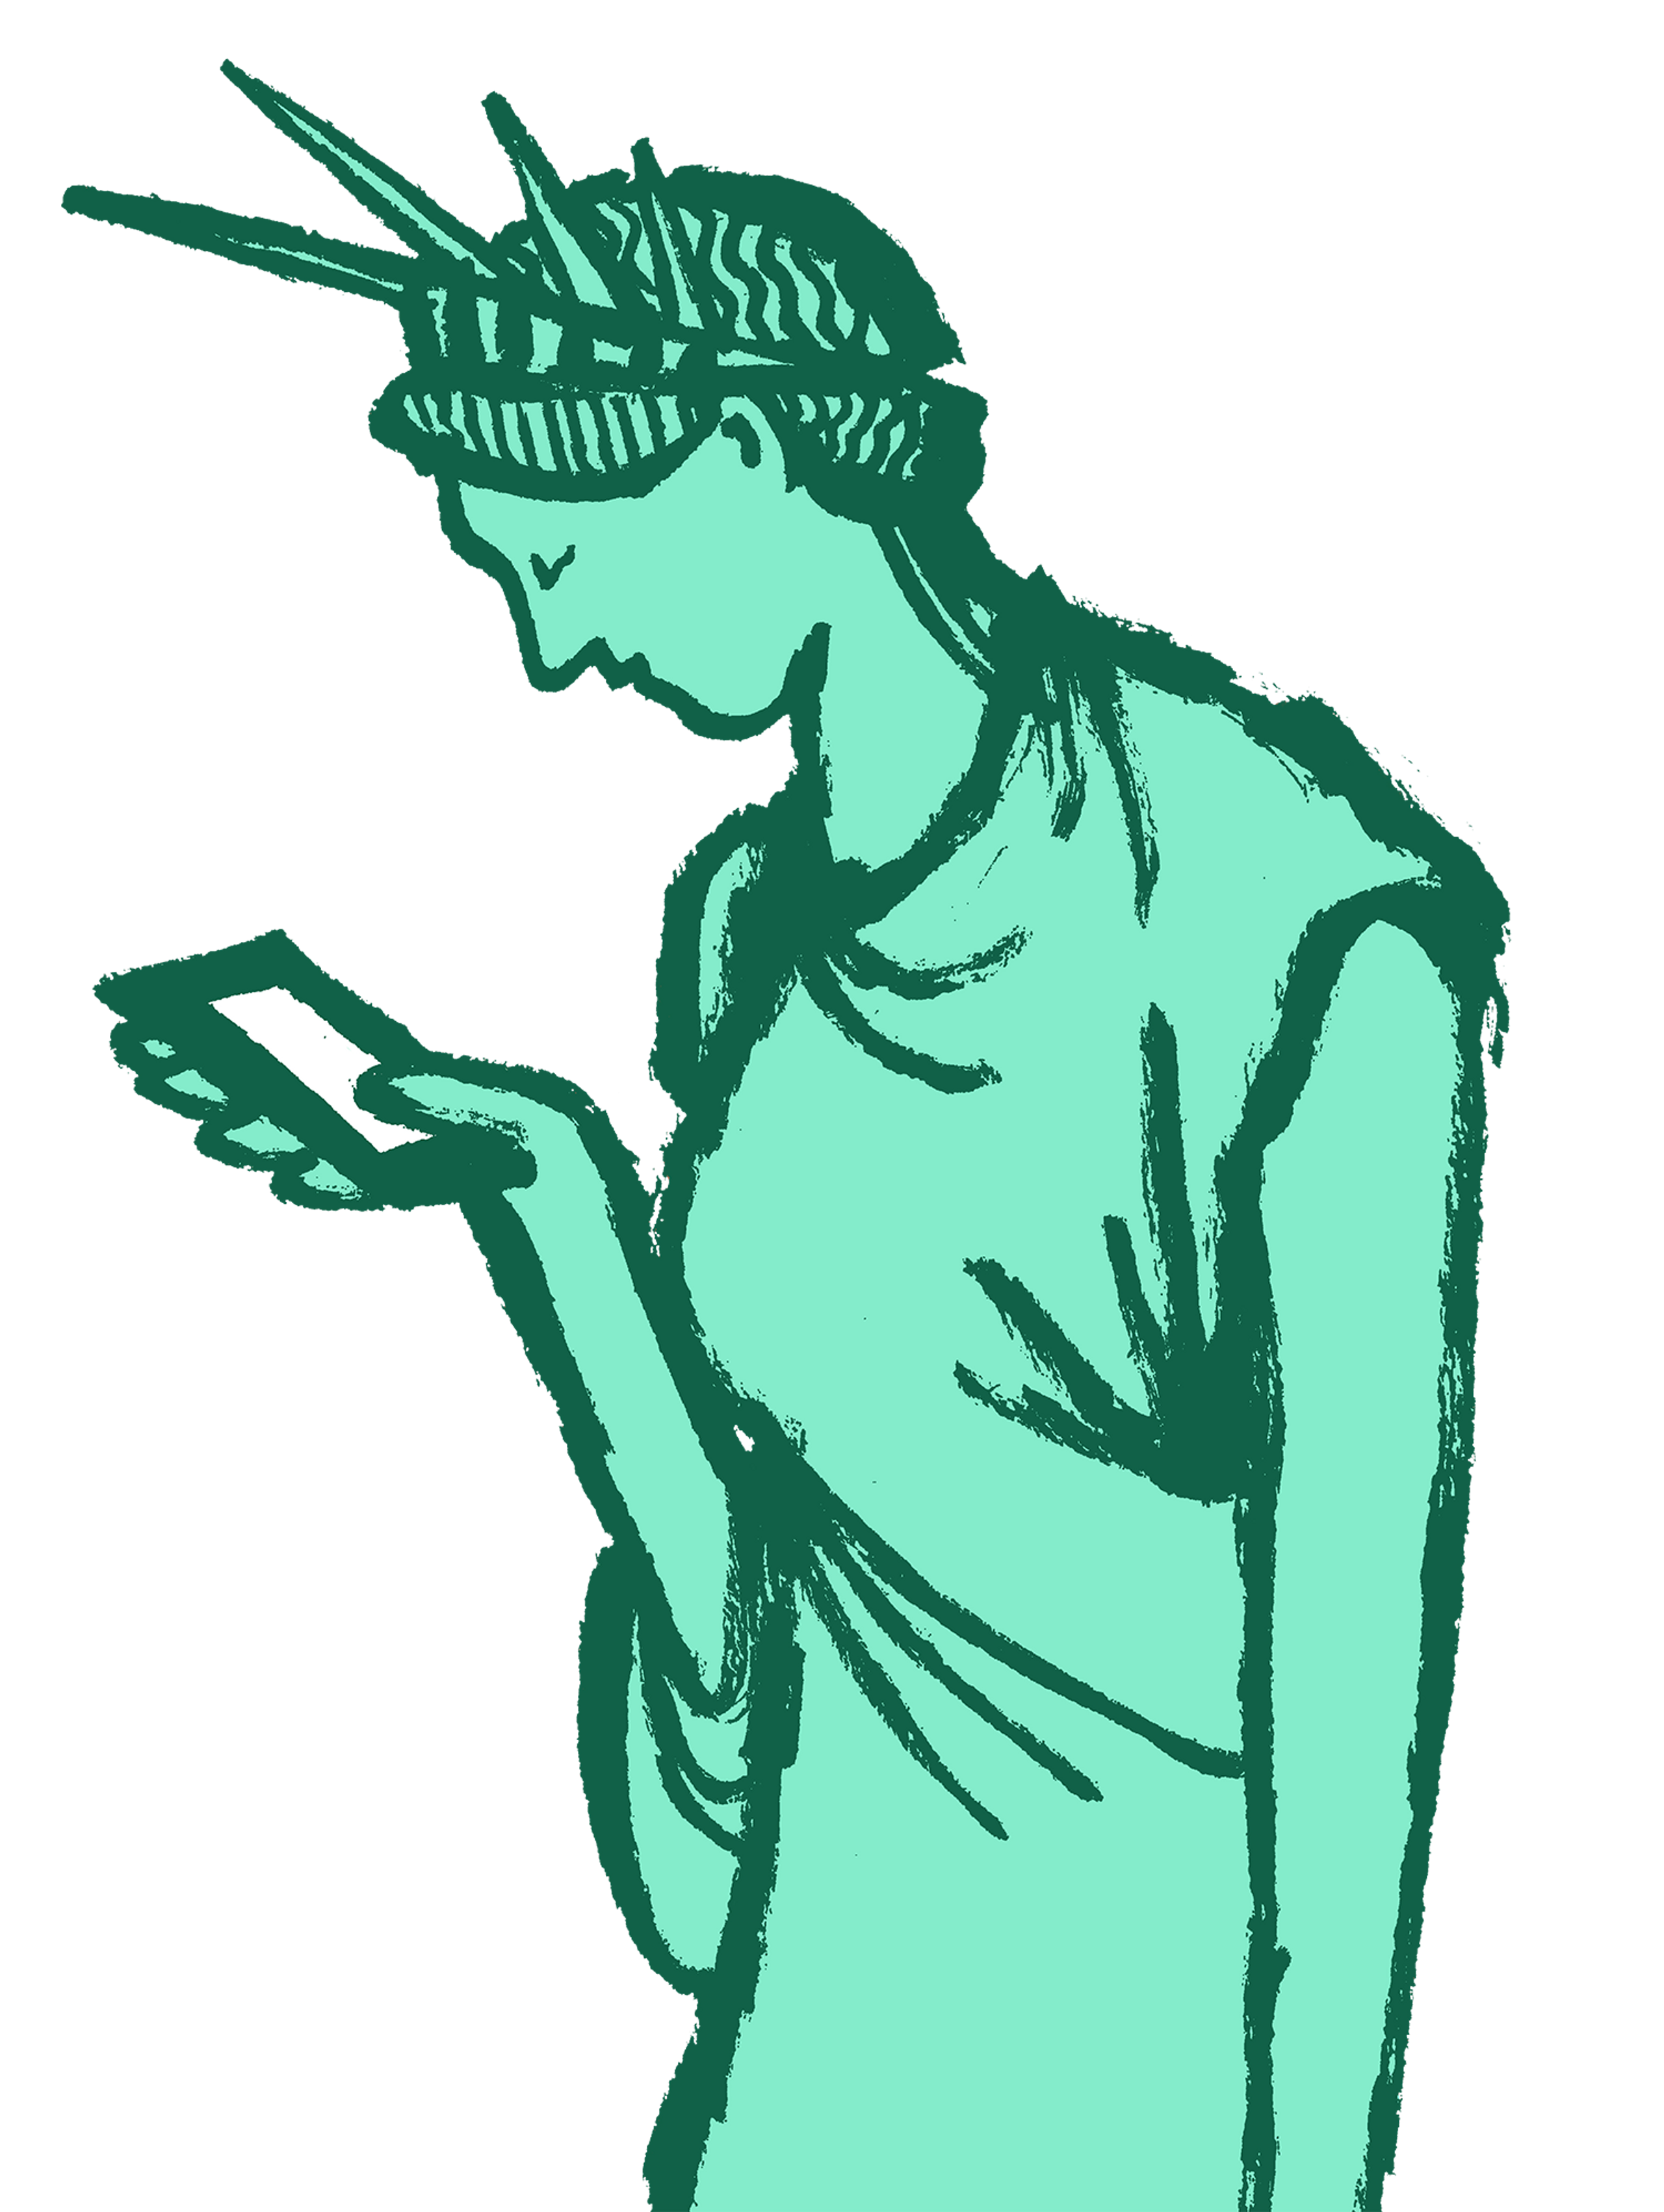 Illustration of the statue of liberty looking at a phone